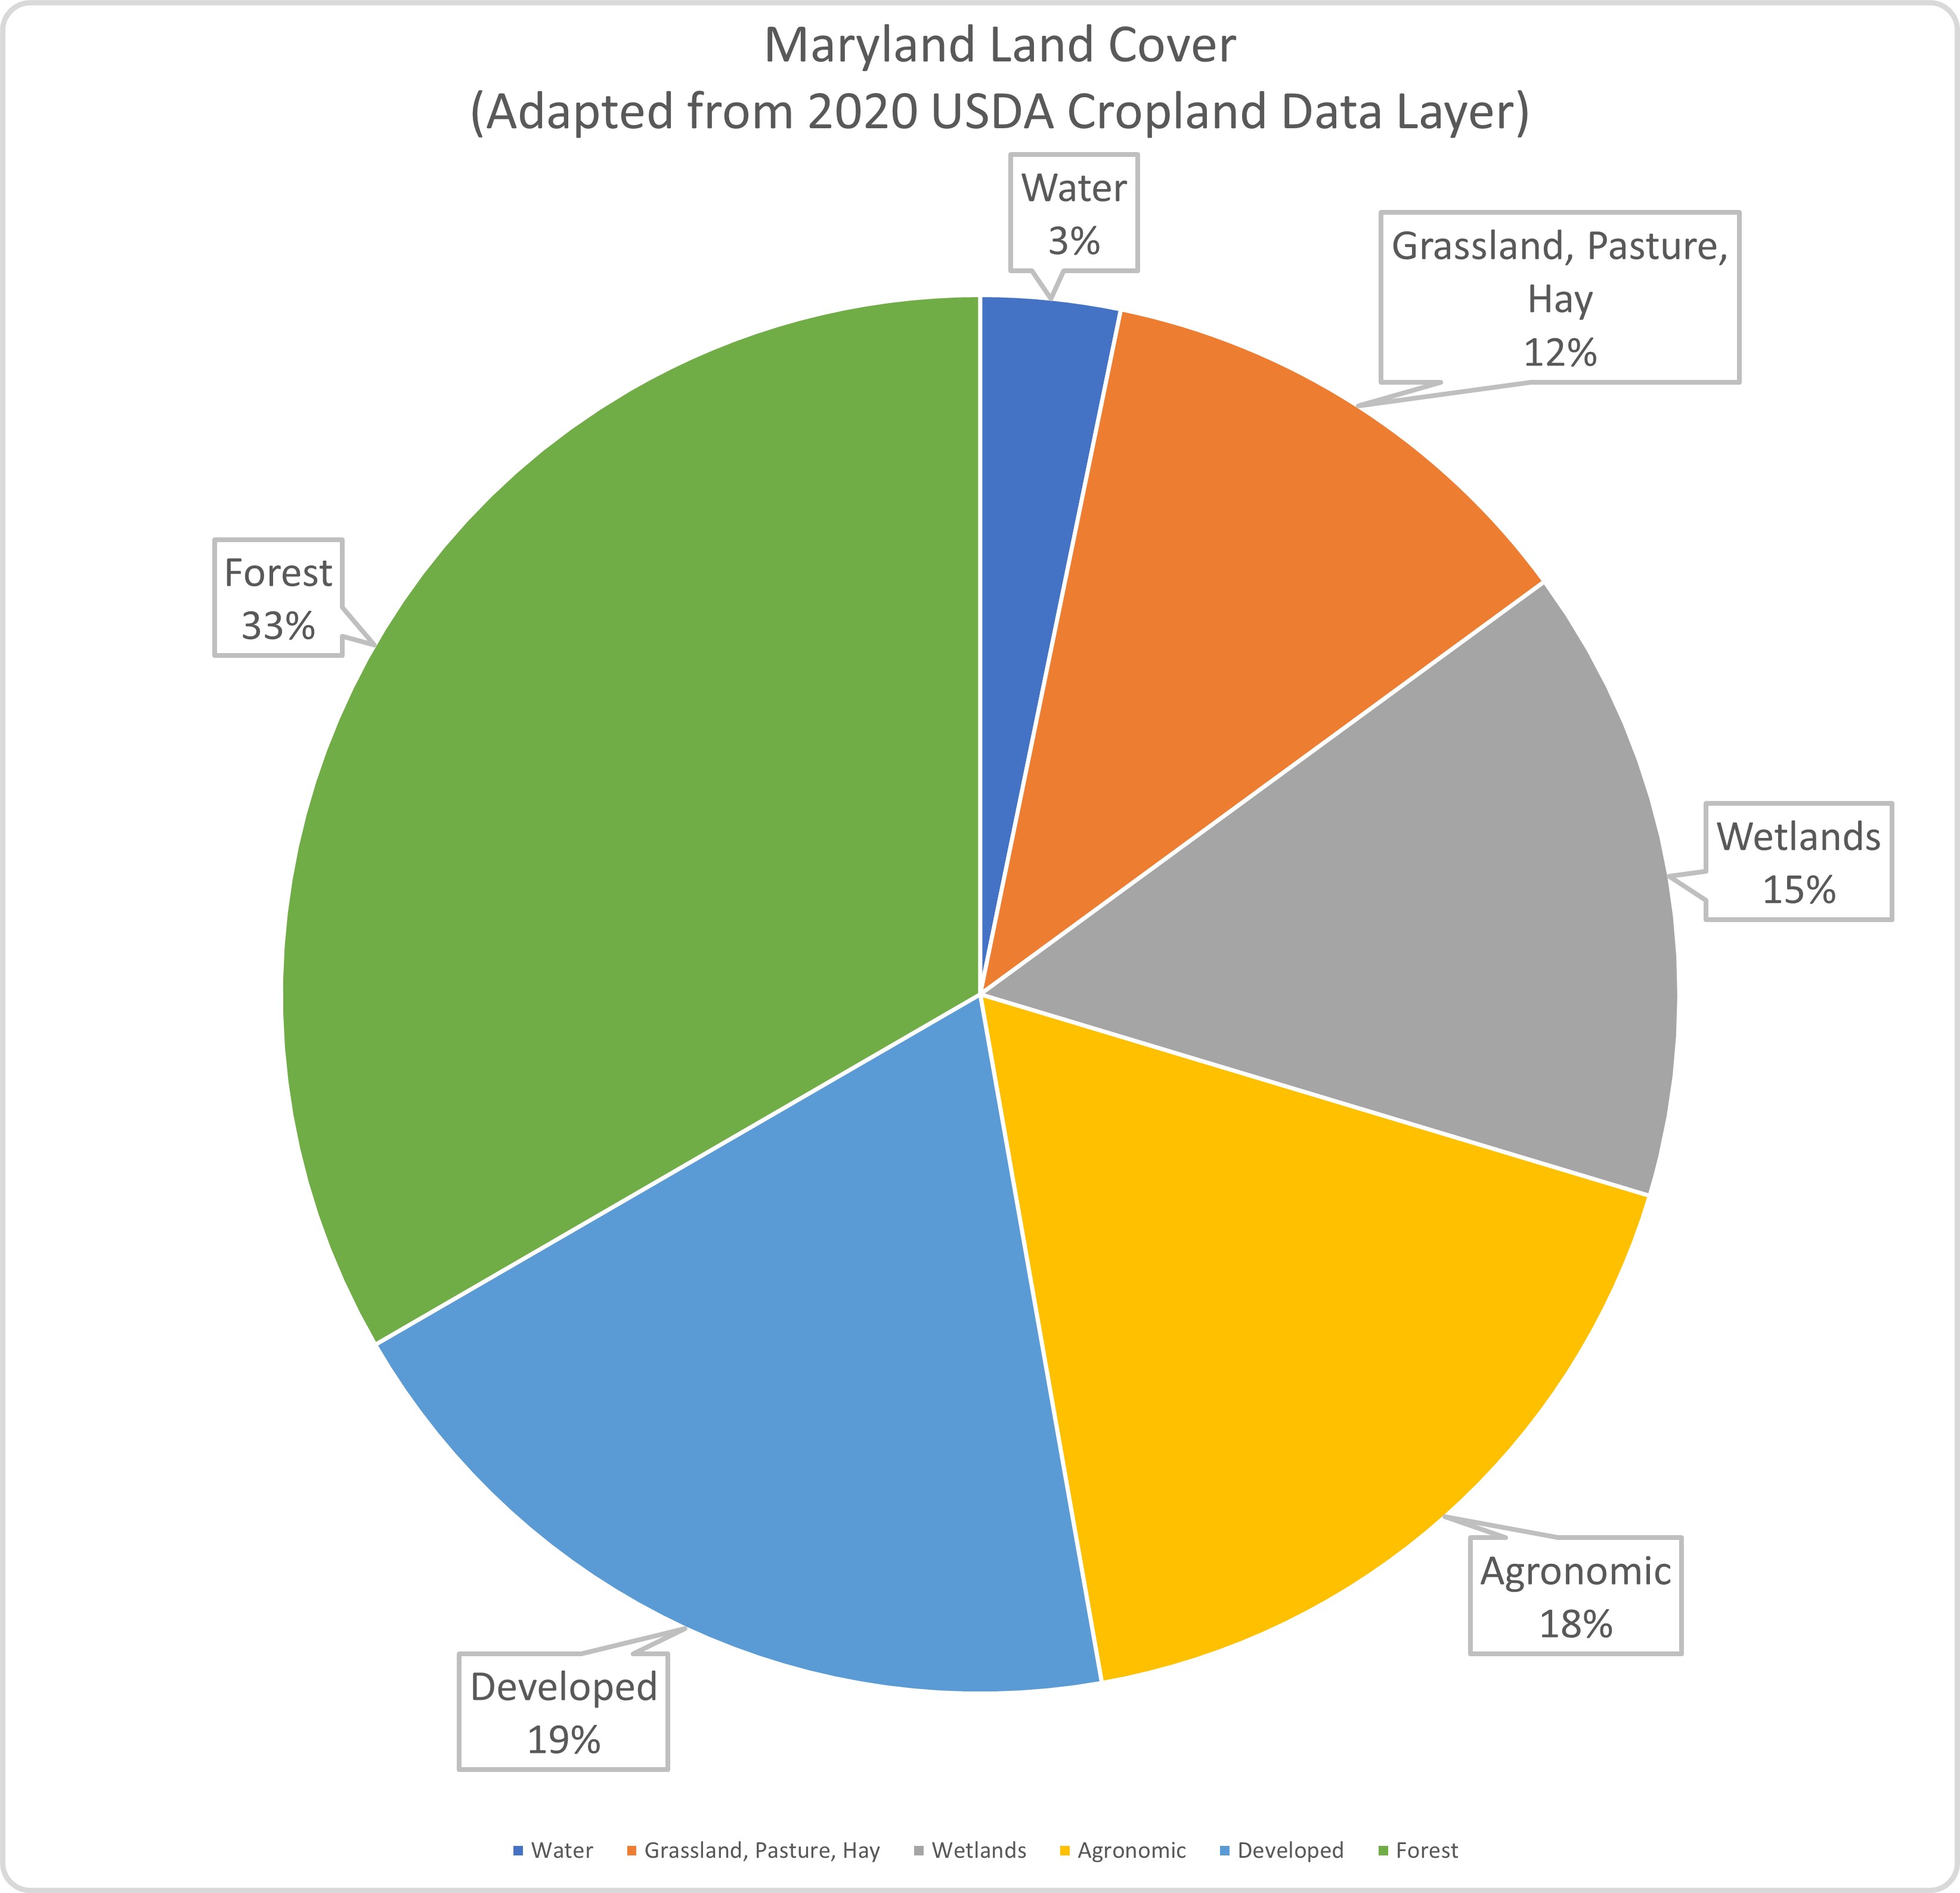 Maryland Land Cover (Adapted from 2020 USDA Cropland Data Layer)